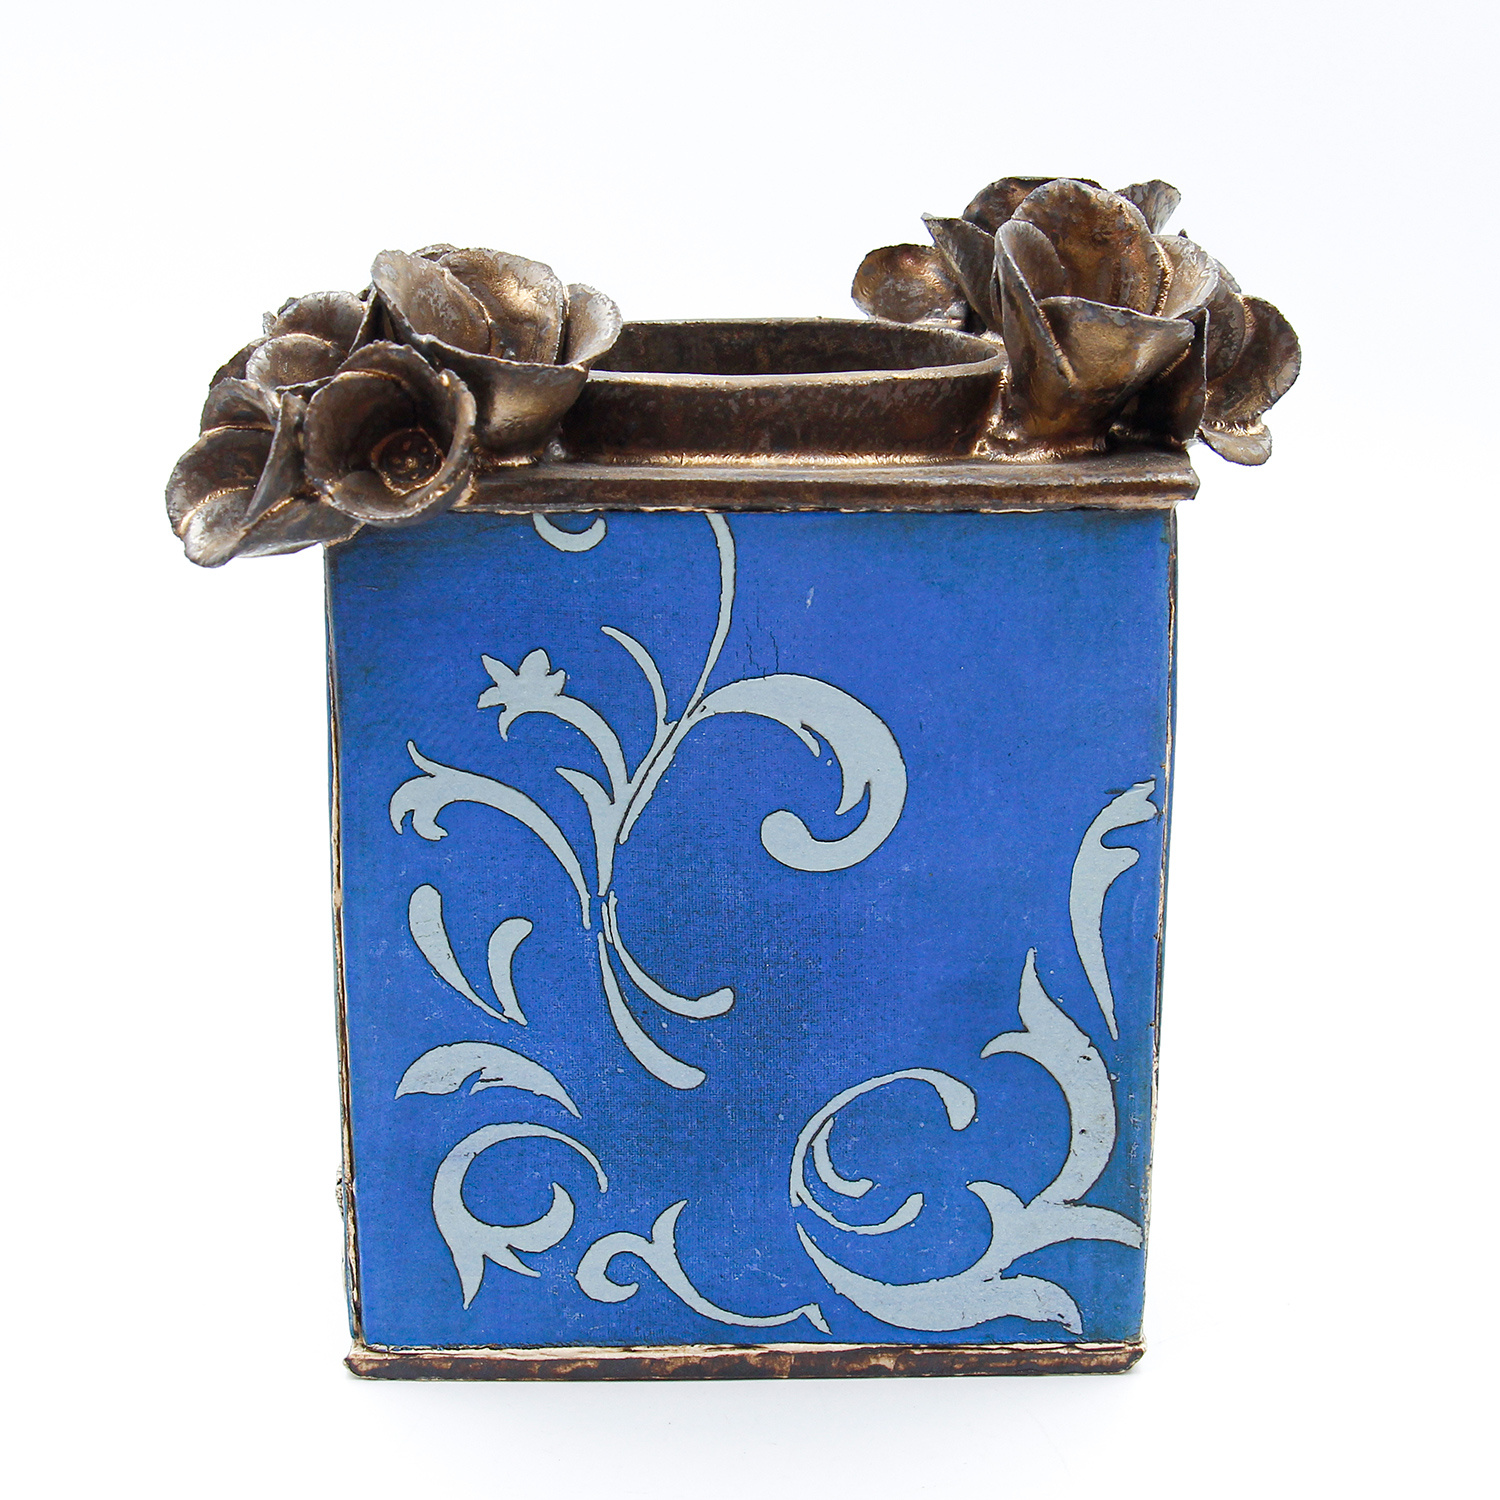 Electric Blue Flower Brick with bronze flowers by Sarah Dunstan